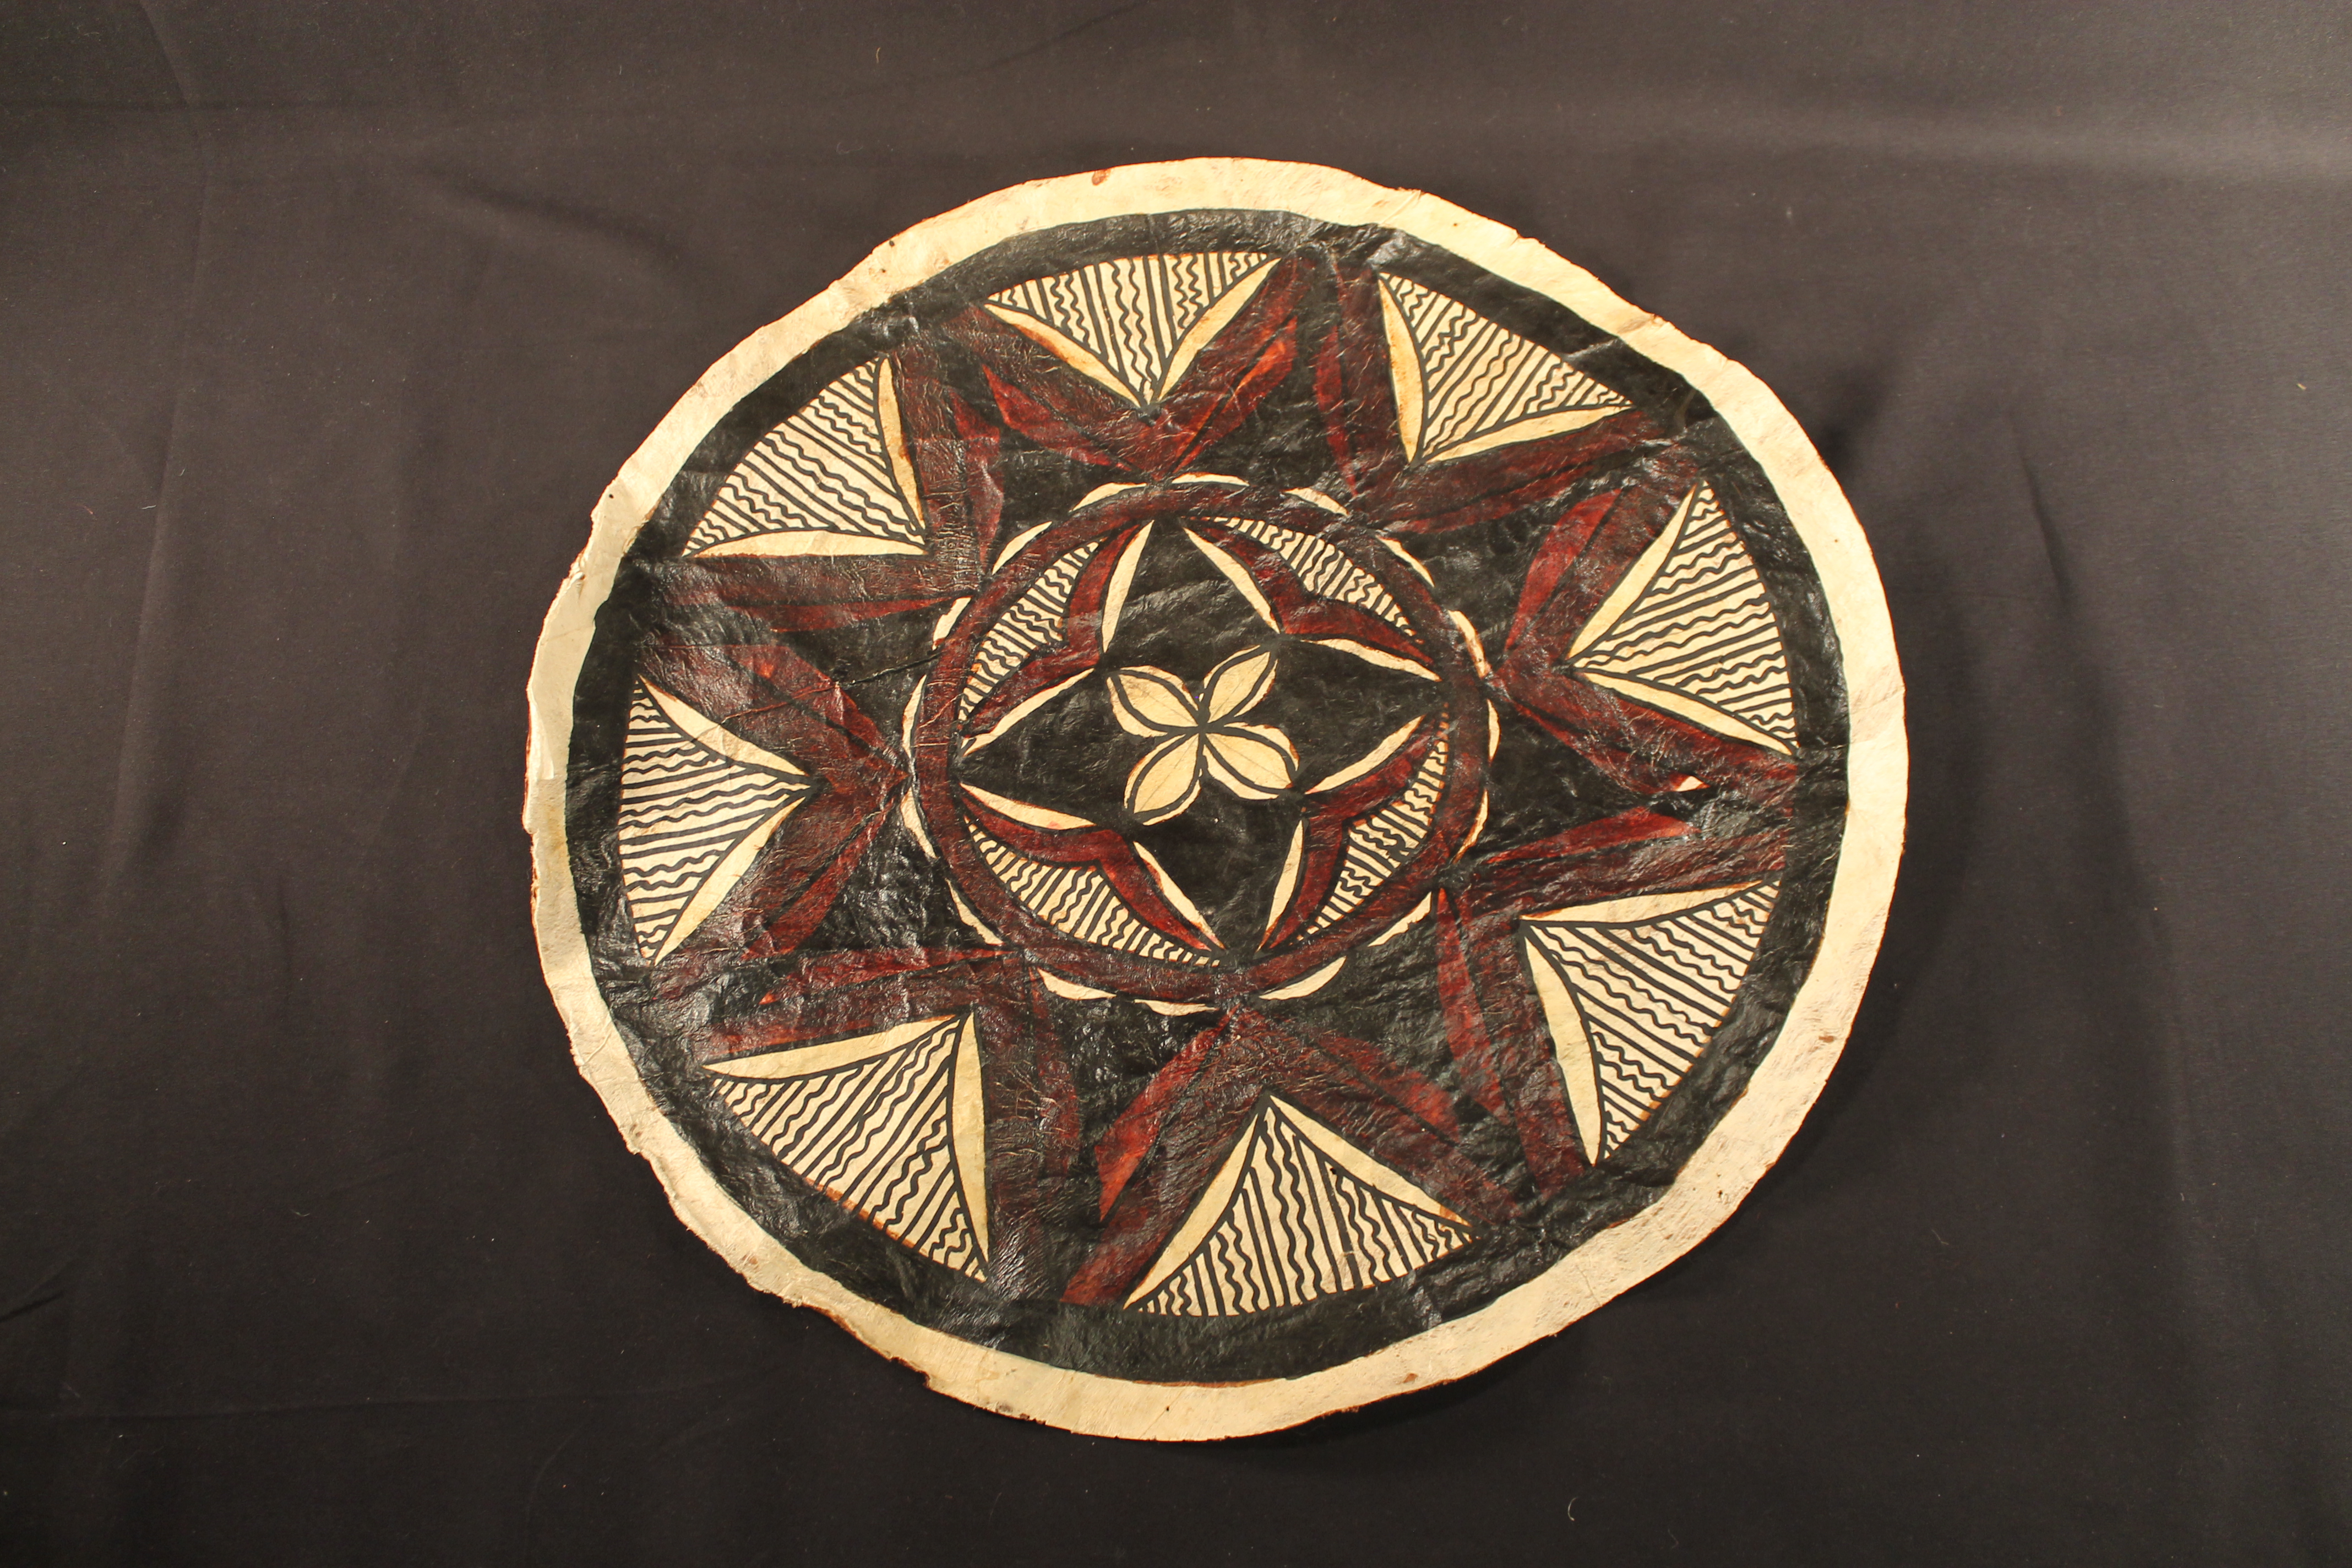 Circular bark cloth made of flattened wood. The bark has a black, red, and maroon-colored design on a tan background. Black straight and squiggly lines radiate out from designs. 